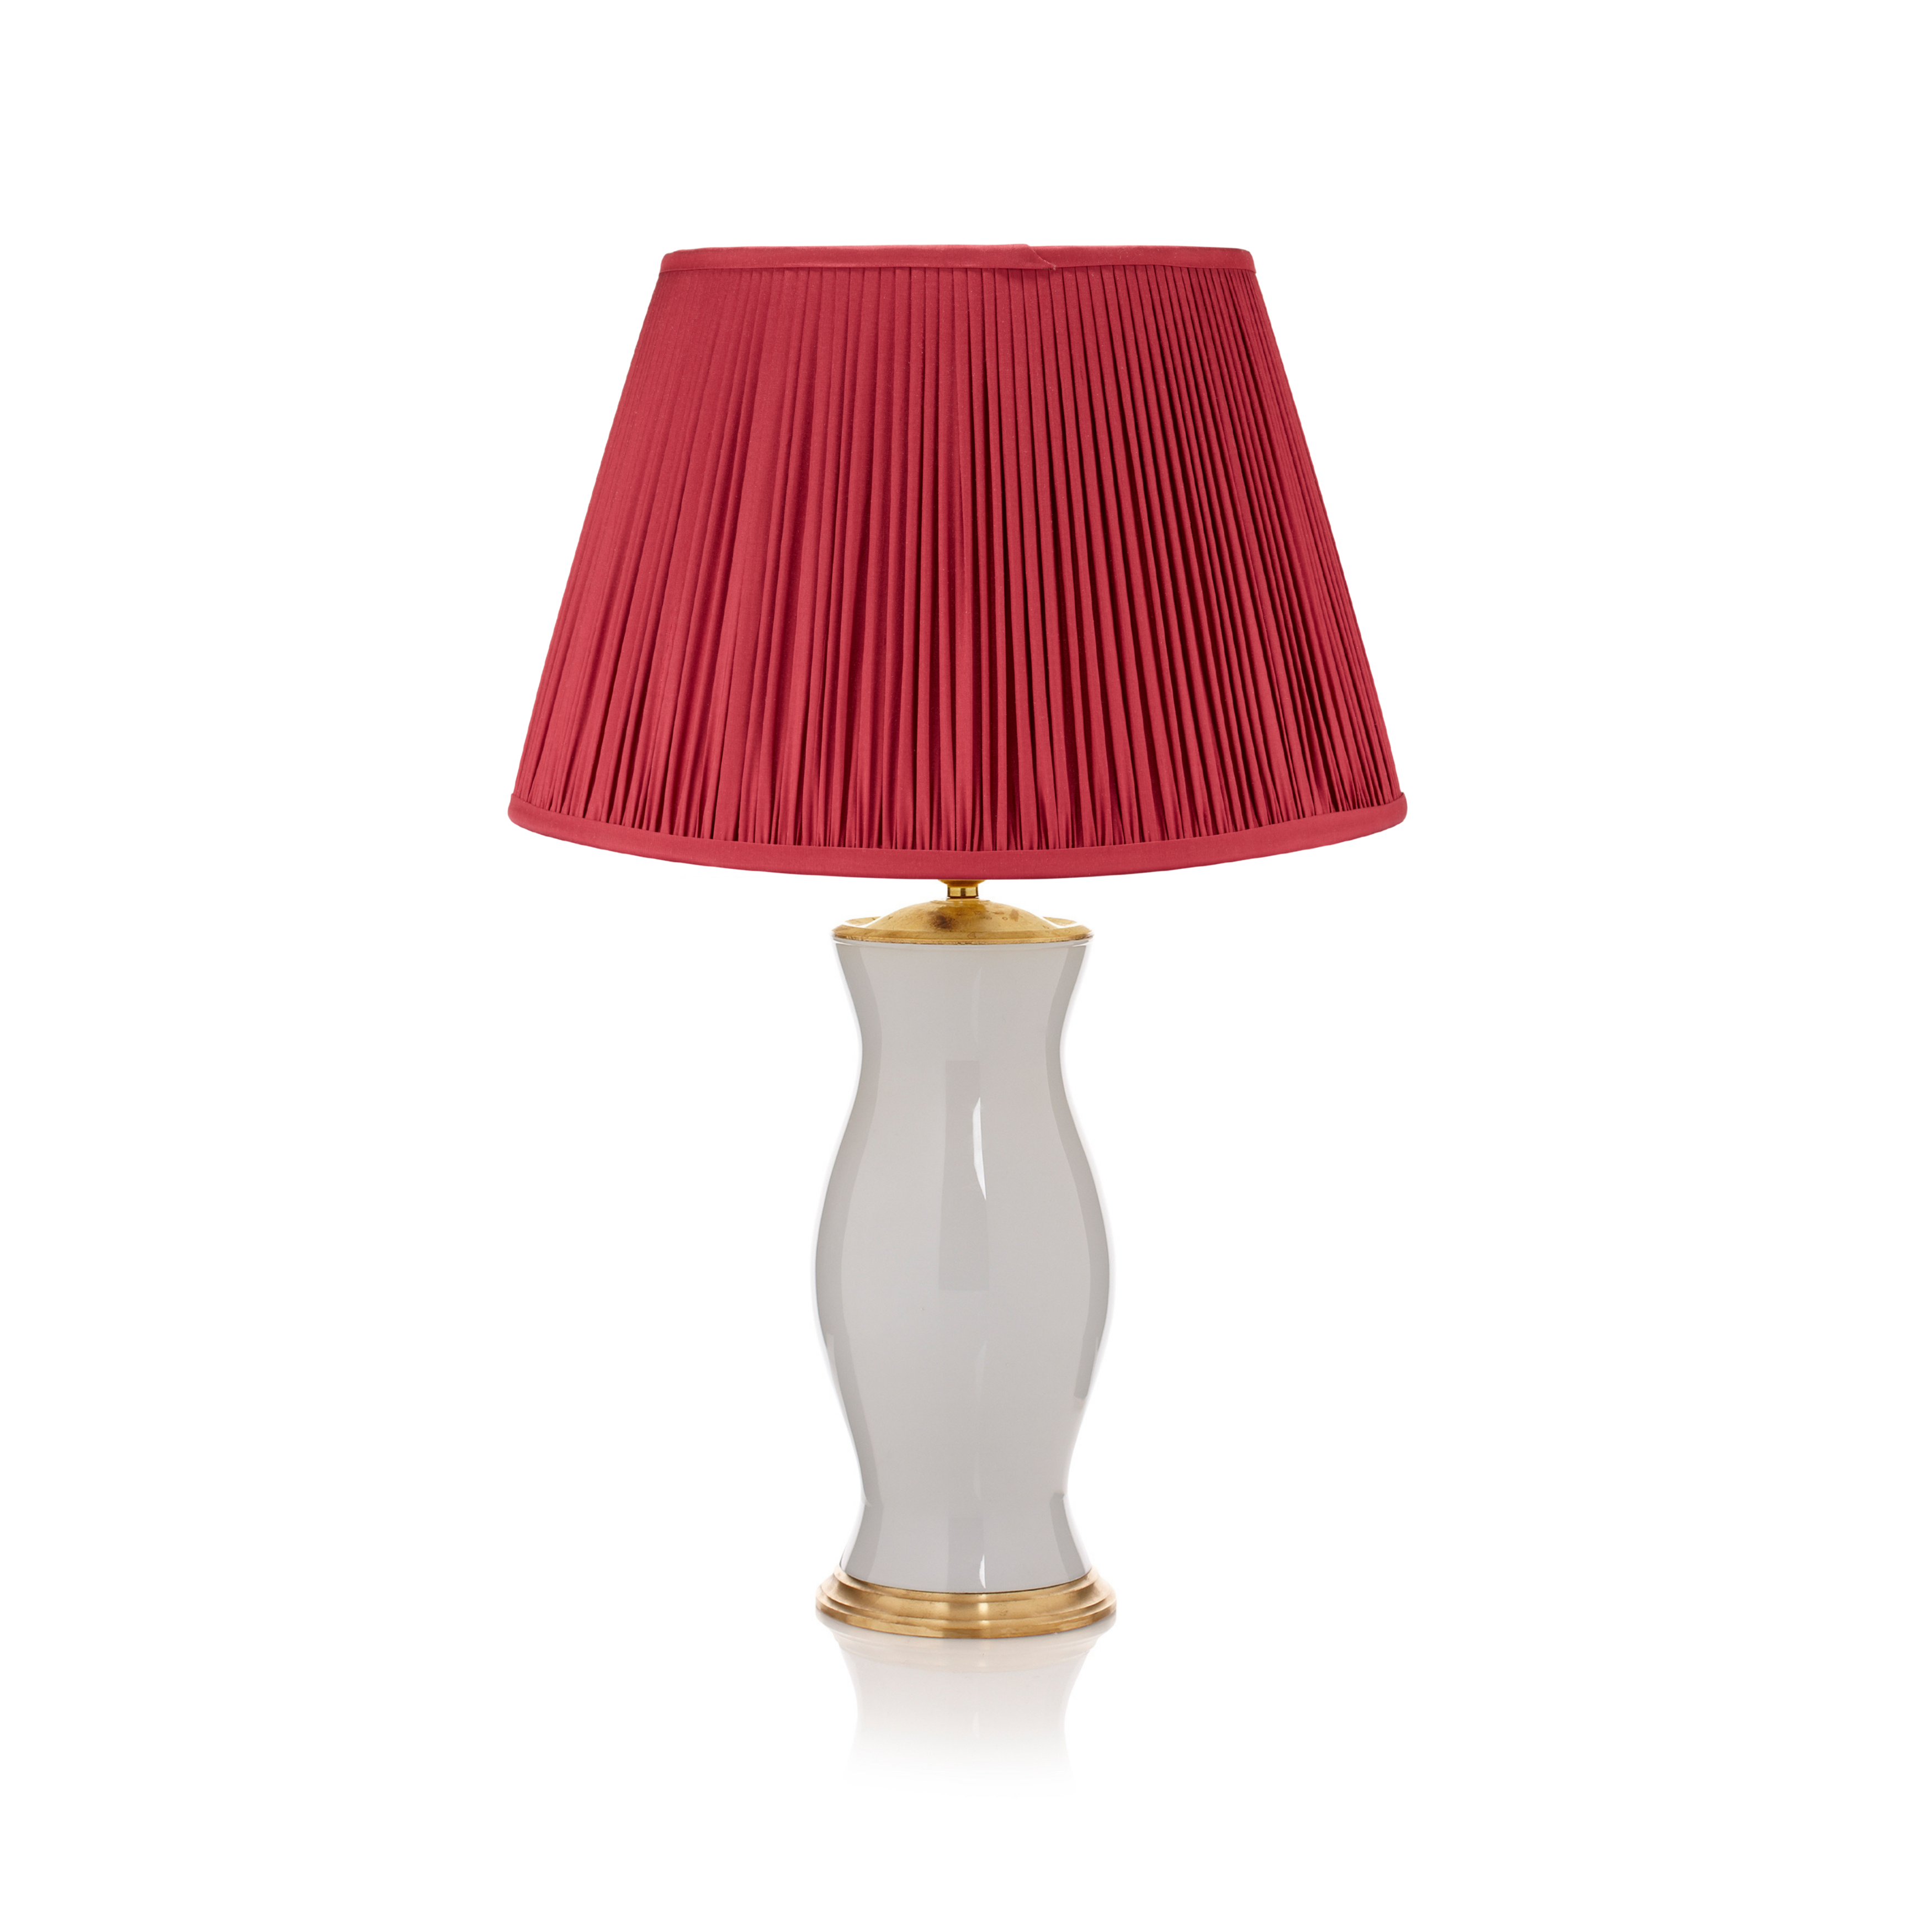 PLEATED SILK LAMPSHADE IN RASPBERRY